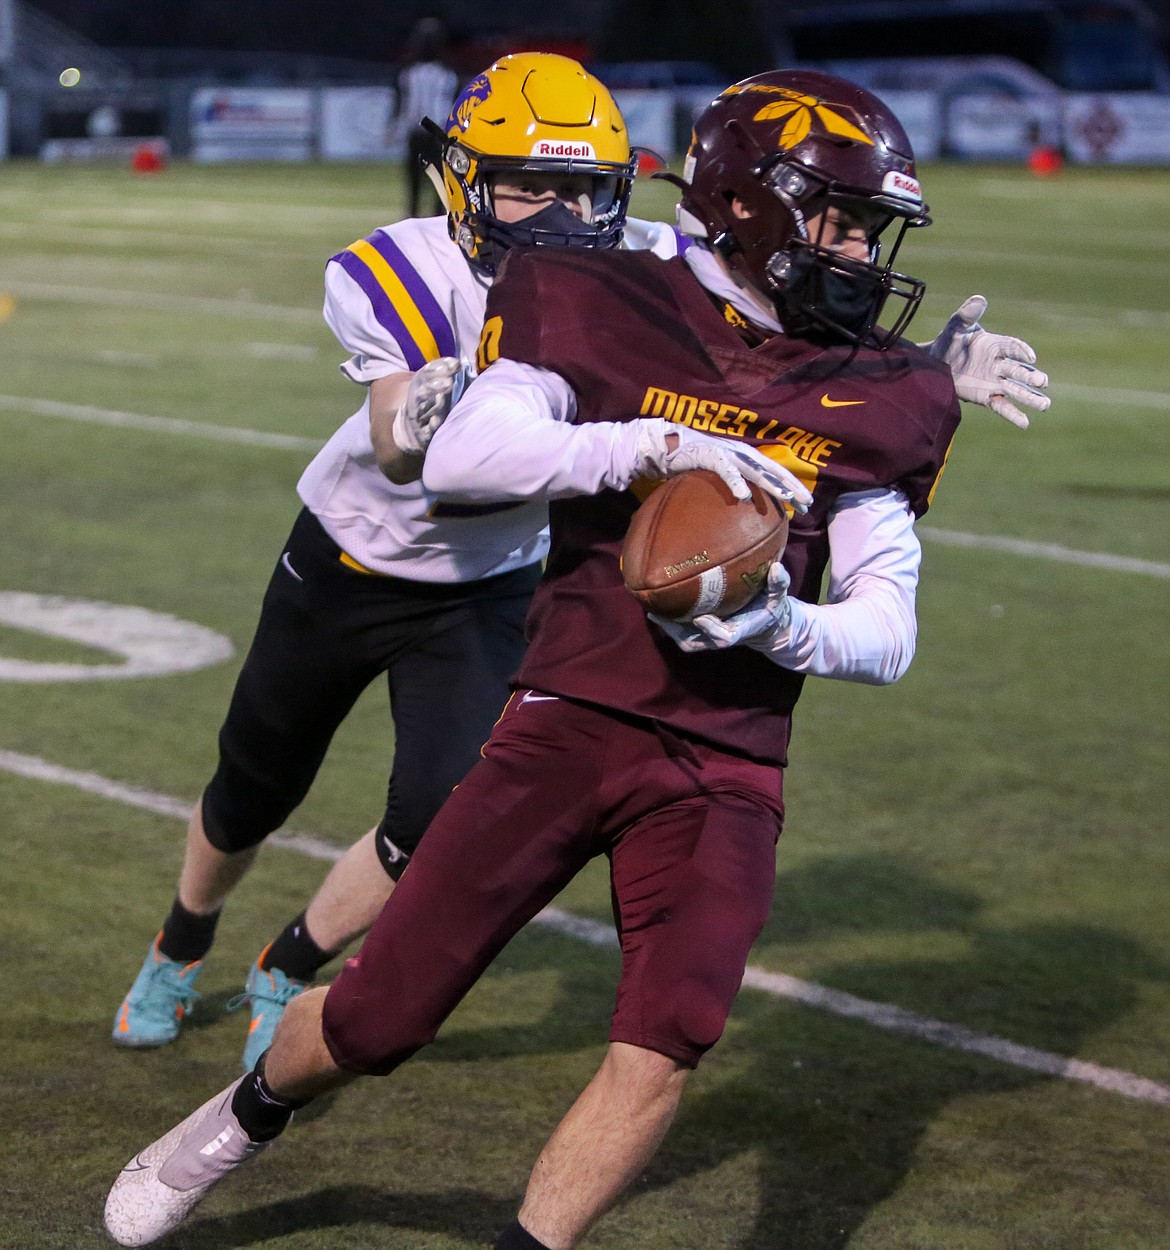 Brandon Johnson hauls in the catch for Moses Lake near the sideline against Wenatchee on Friday night at Lions Field.